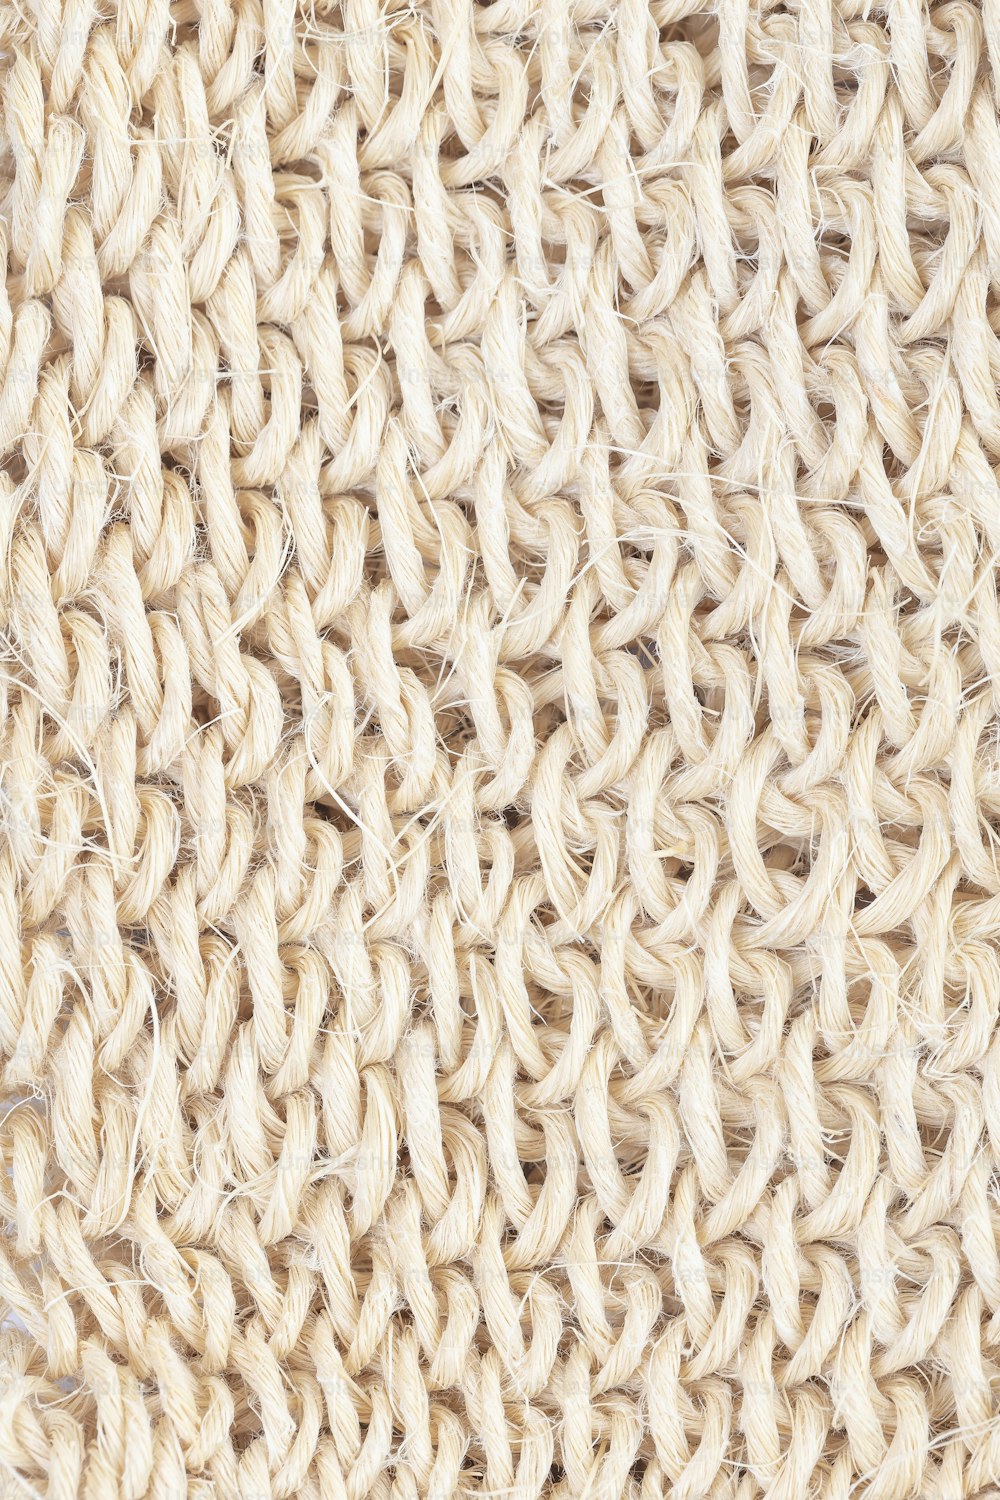 a close up of a knitted cloth texture